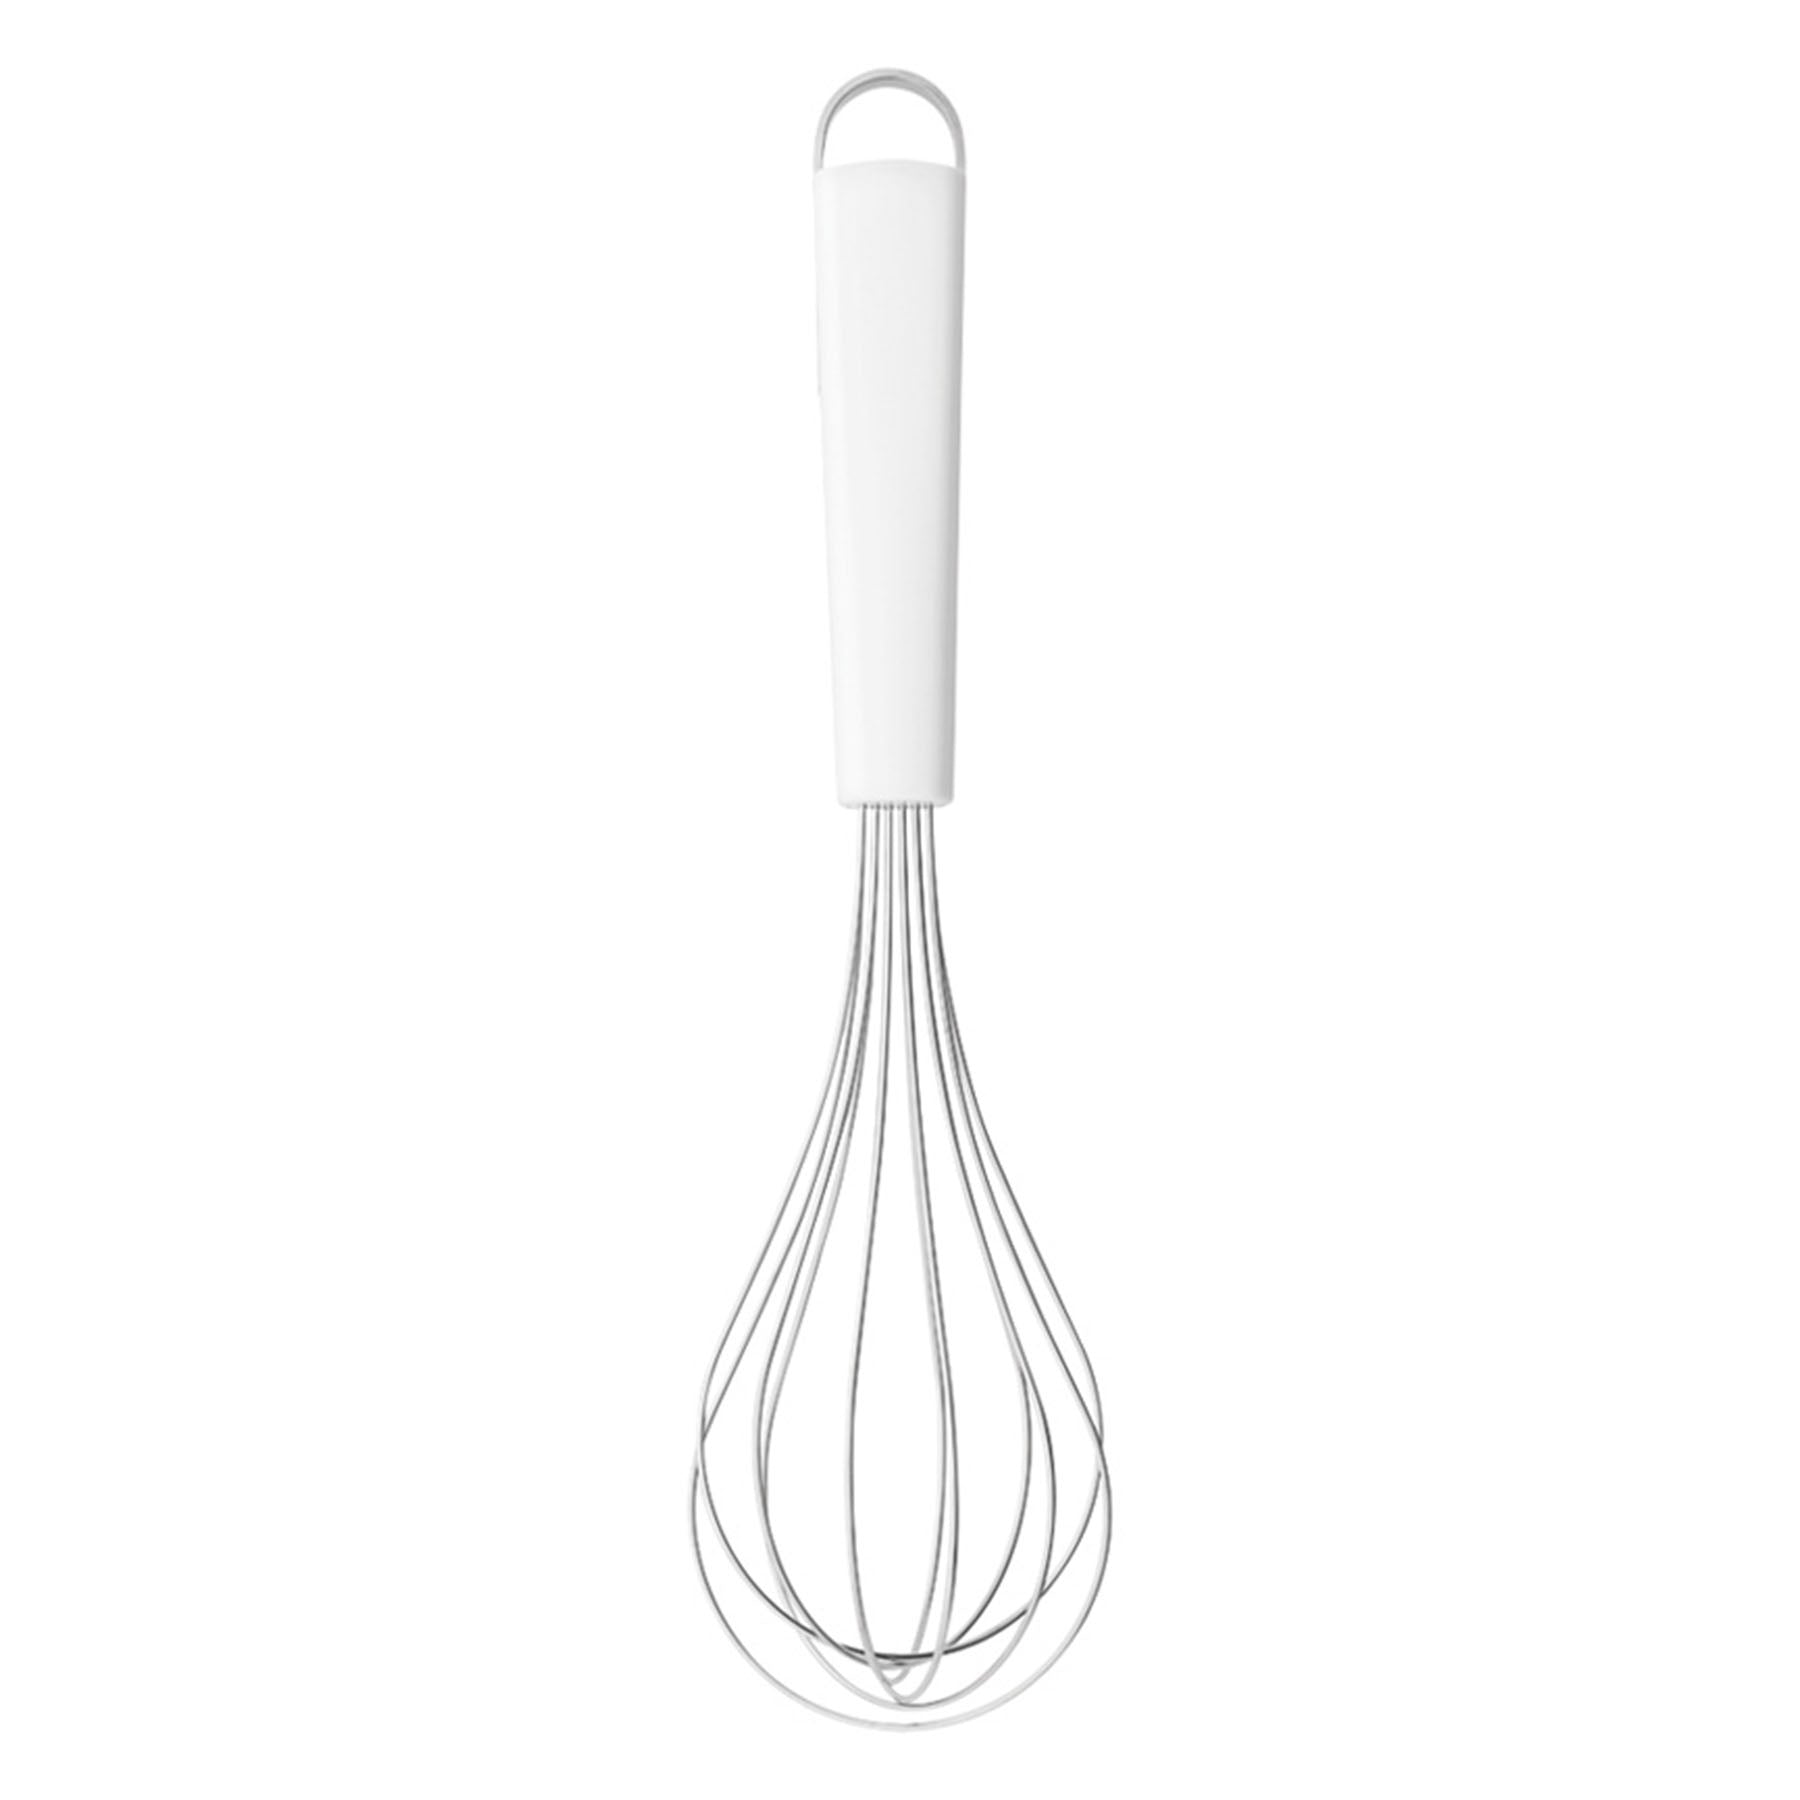 WHISK - Large Dimensions:
 Height: 27.2 cm
 Length: 6.6 cm
 Width: 6.6 cm